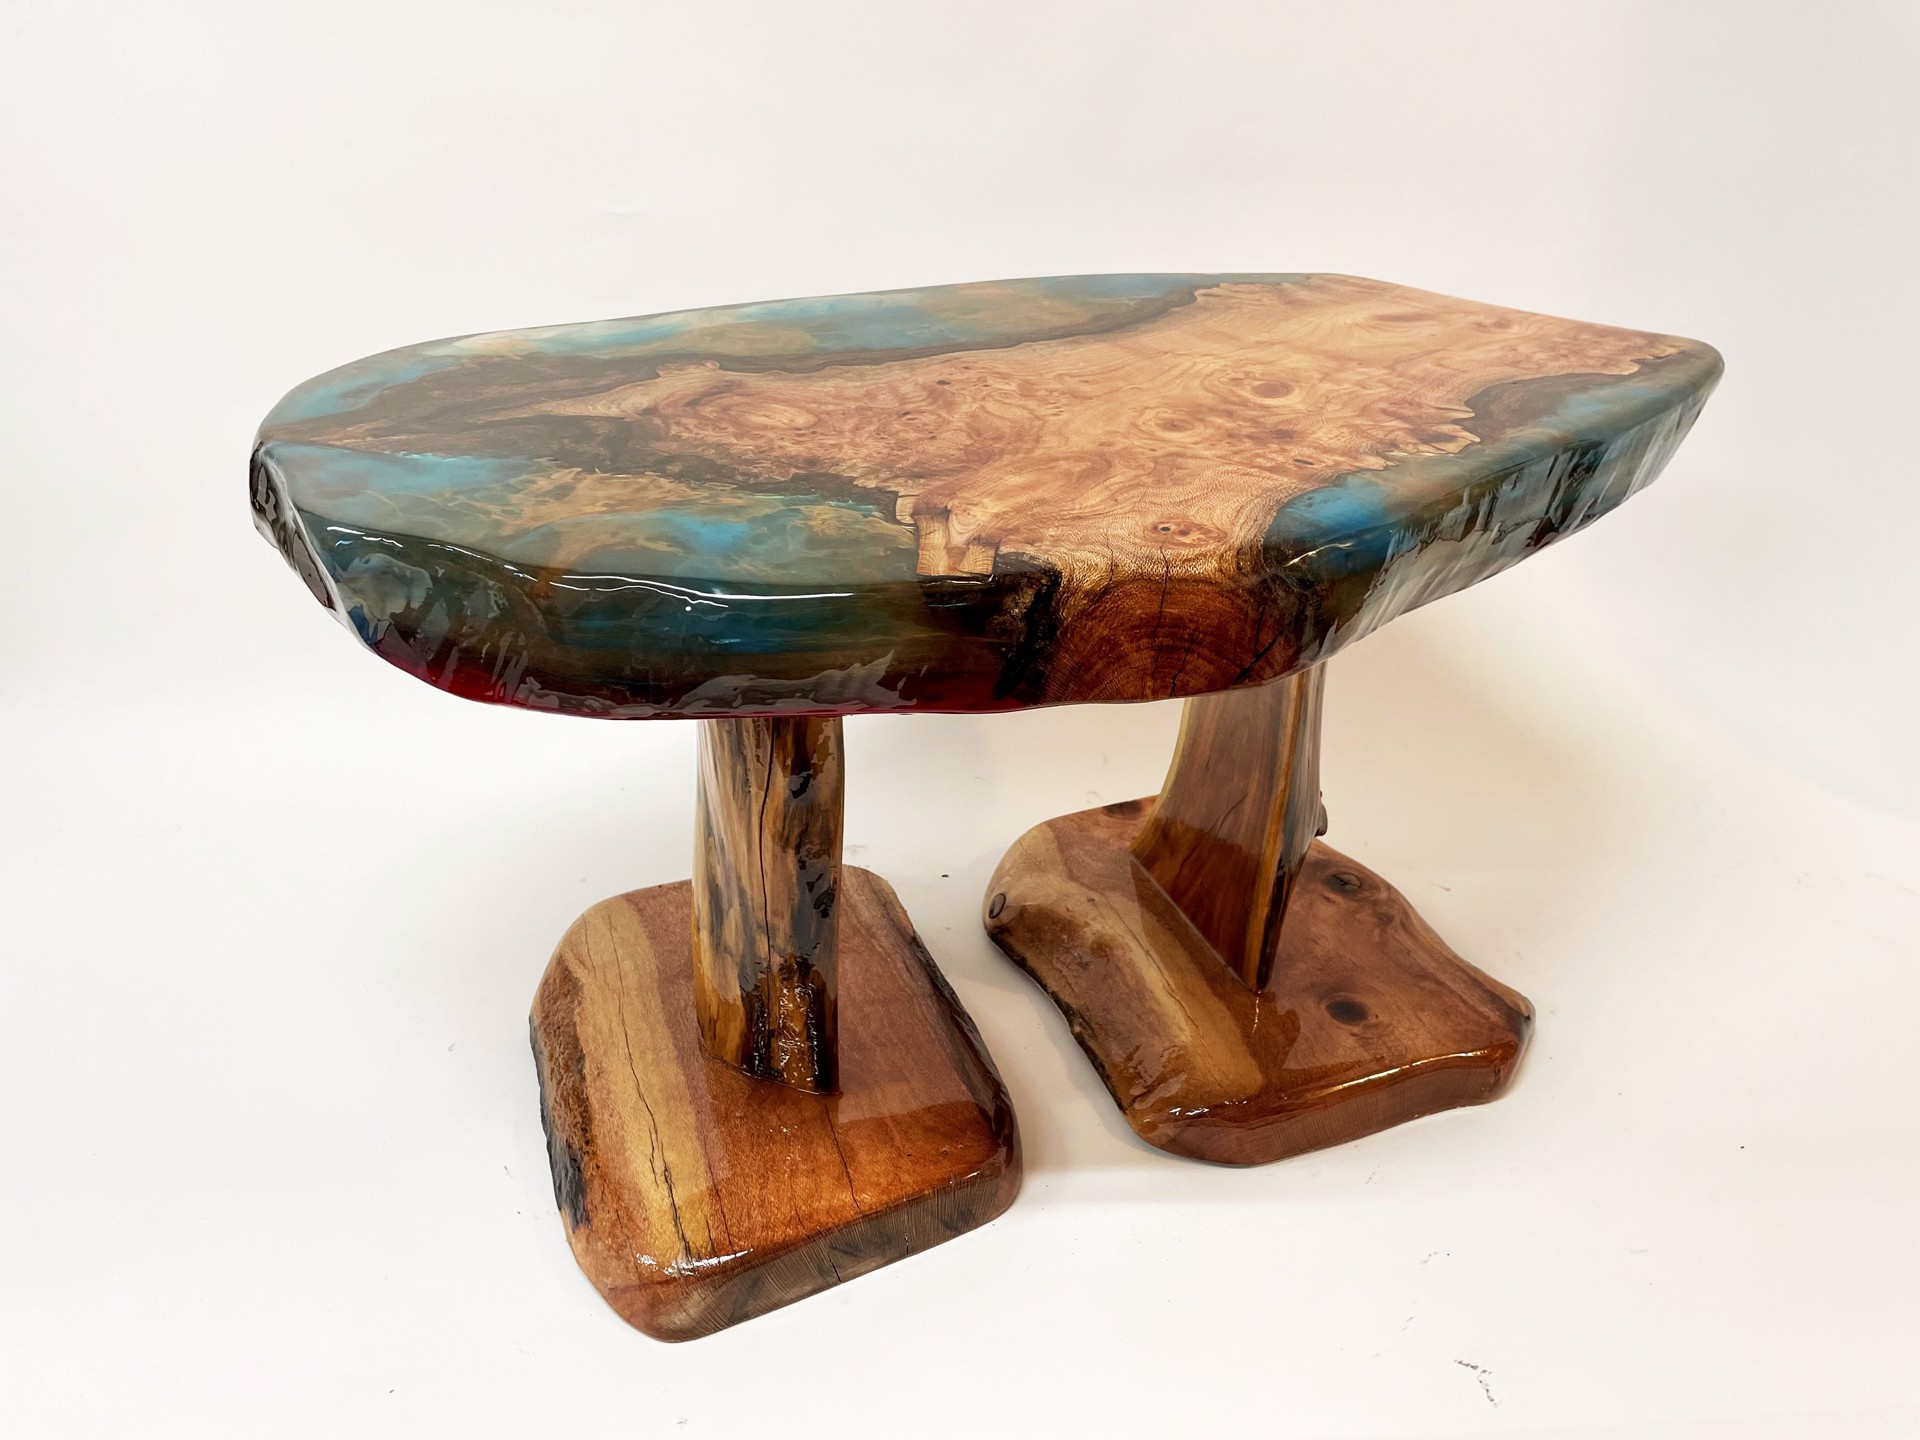 Silky Oak, Mesquite & Resin Small Coffee Table by Kirk Allan